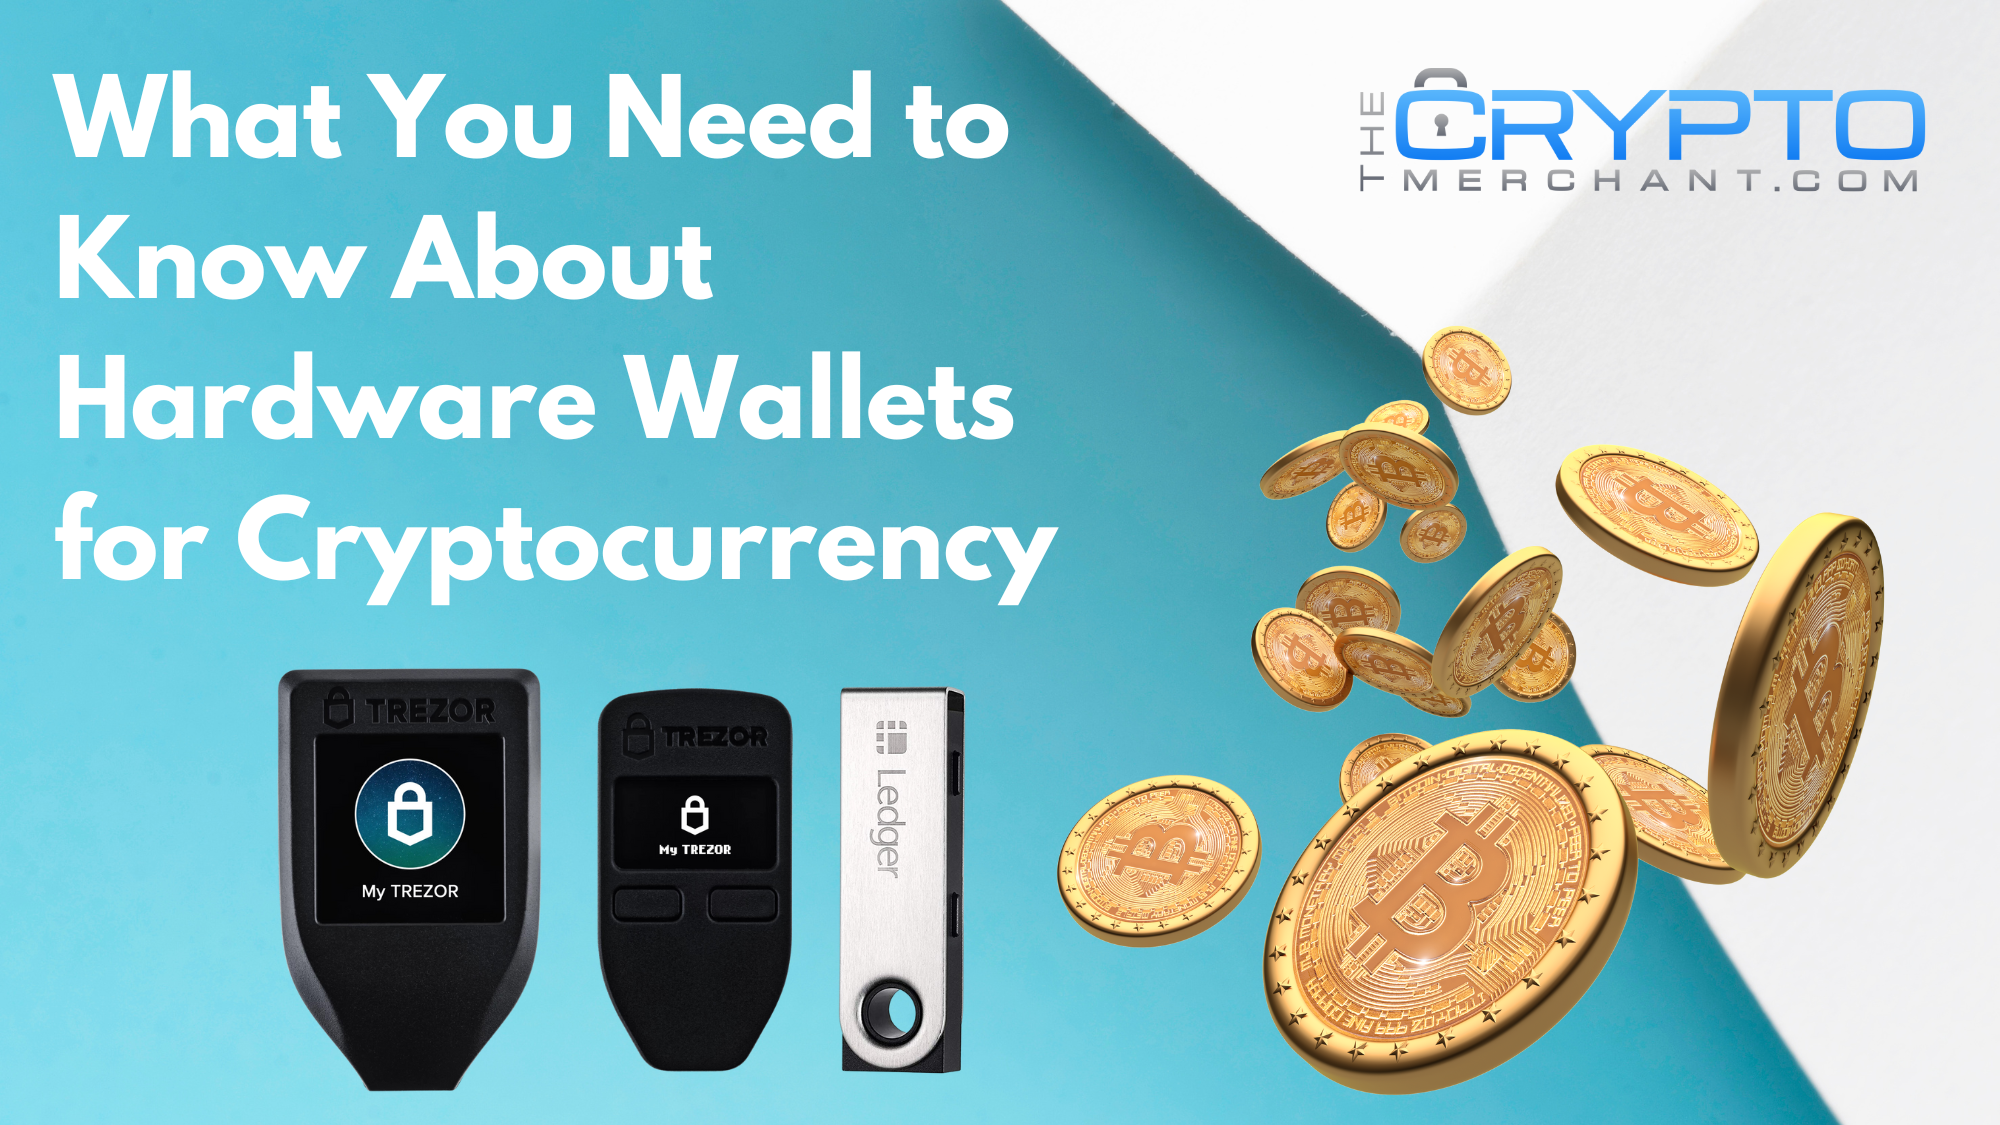 Trezor Wallet: The World's First Hardware Wallet to store Cryptocurrencies